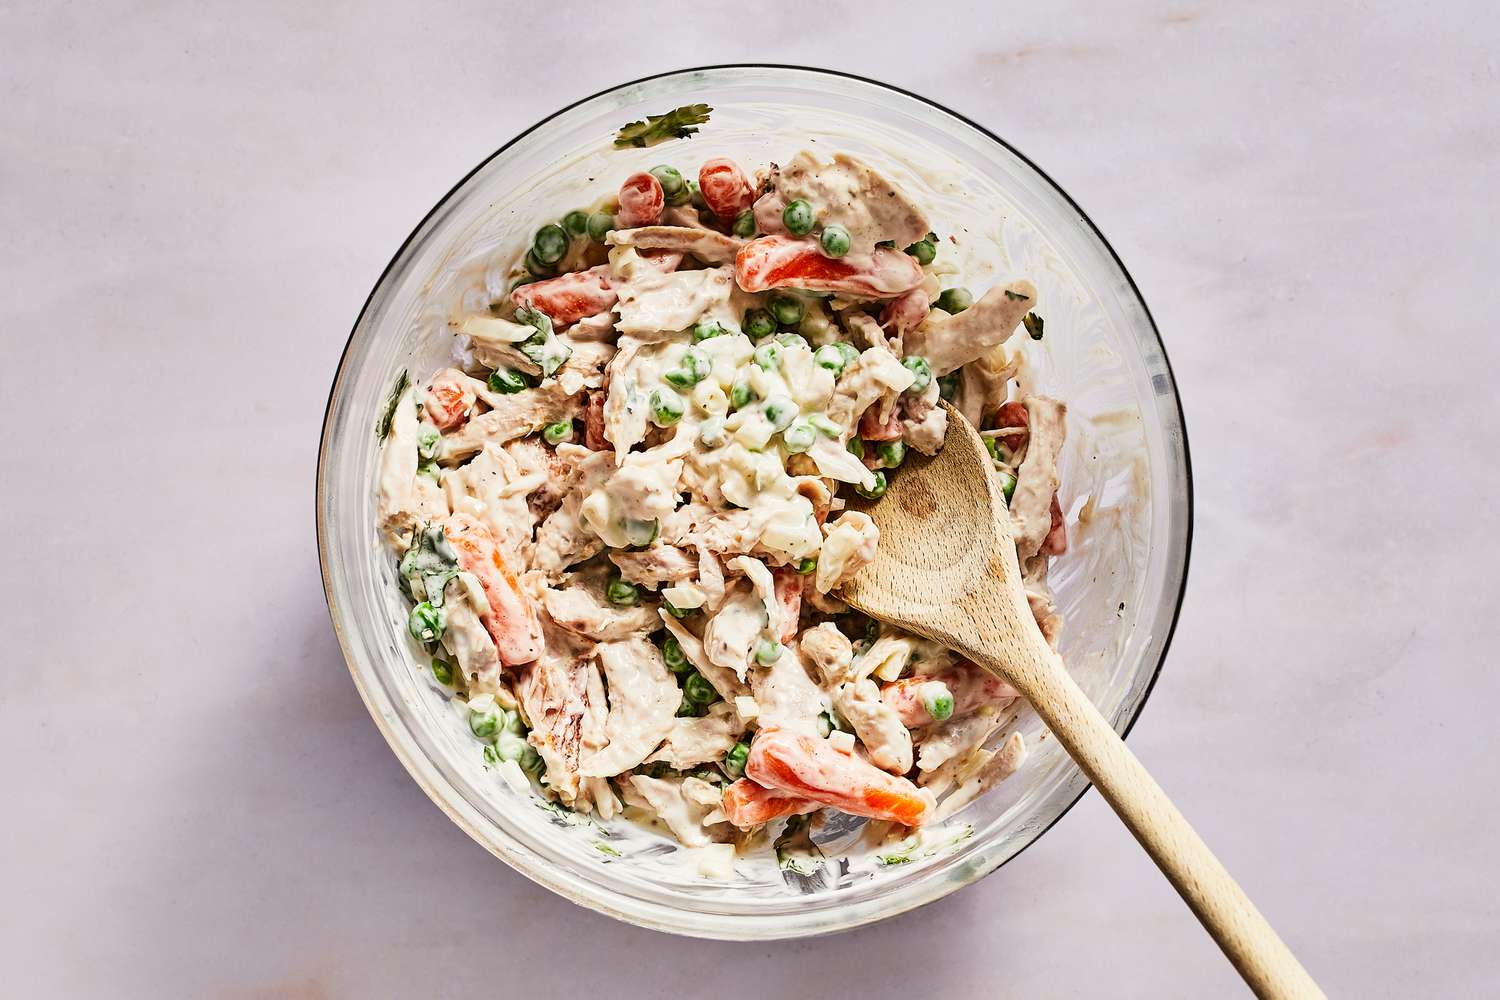 A bowl of shredded rotisserie chicken, peas, carrots, onion, and cilantro tossed in the mayonnaise-crema dressing